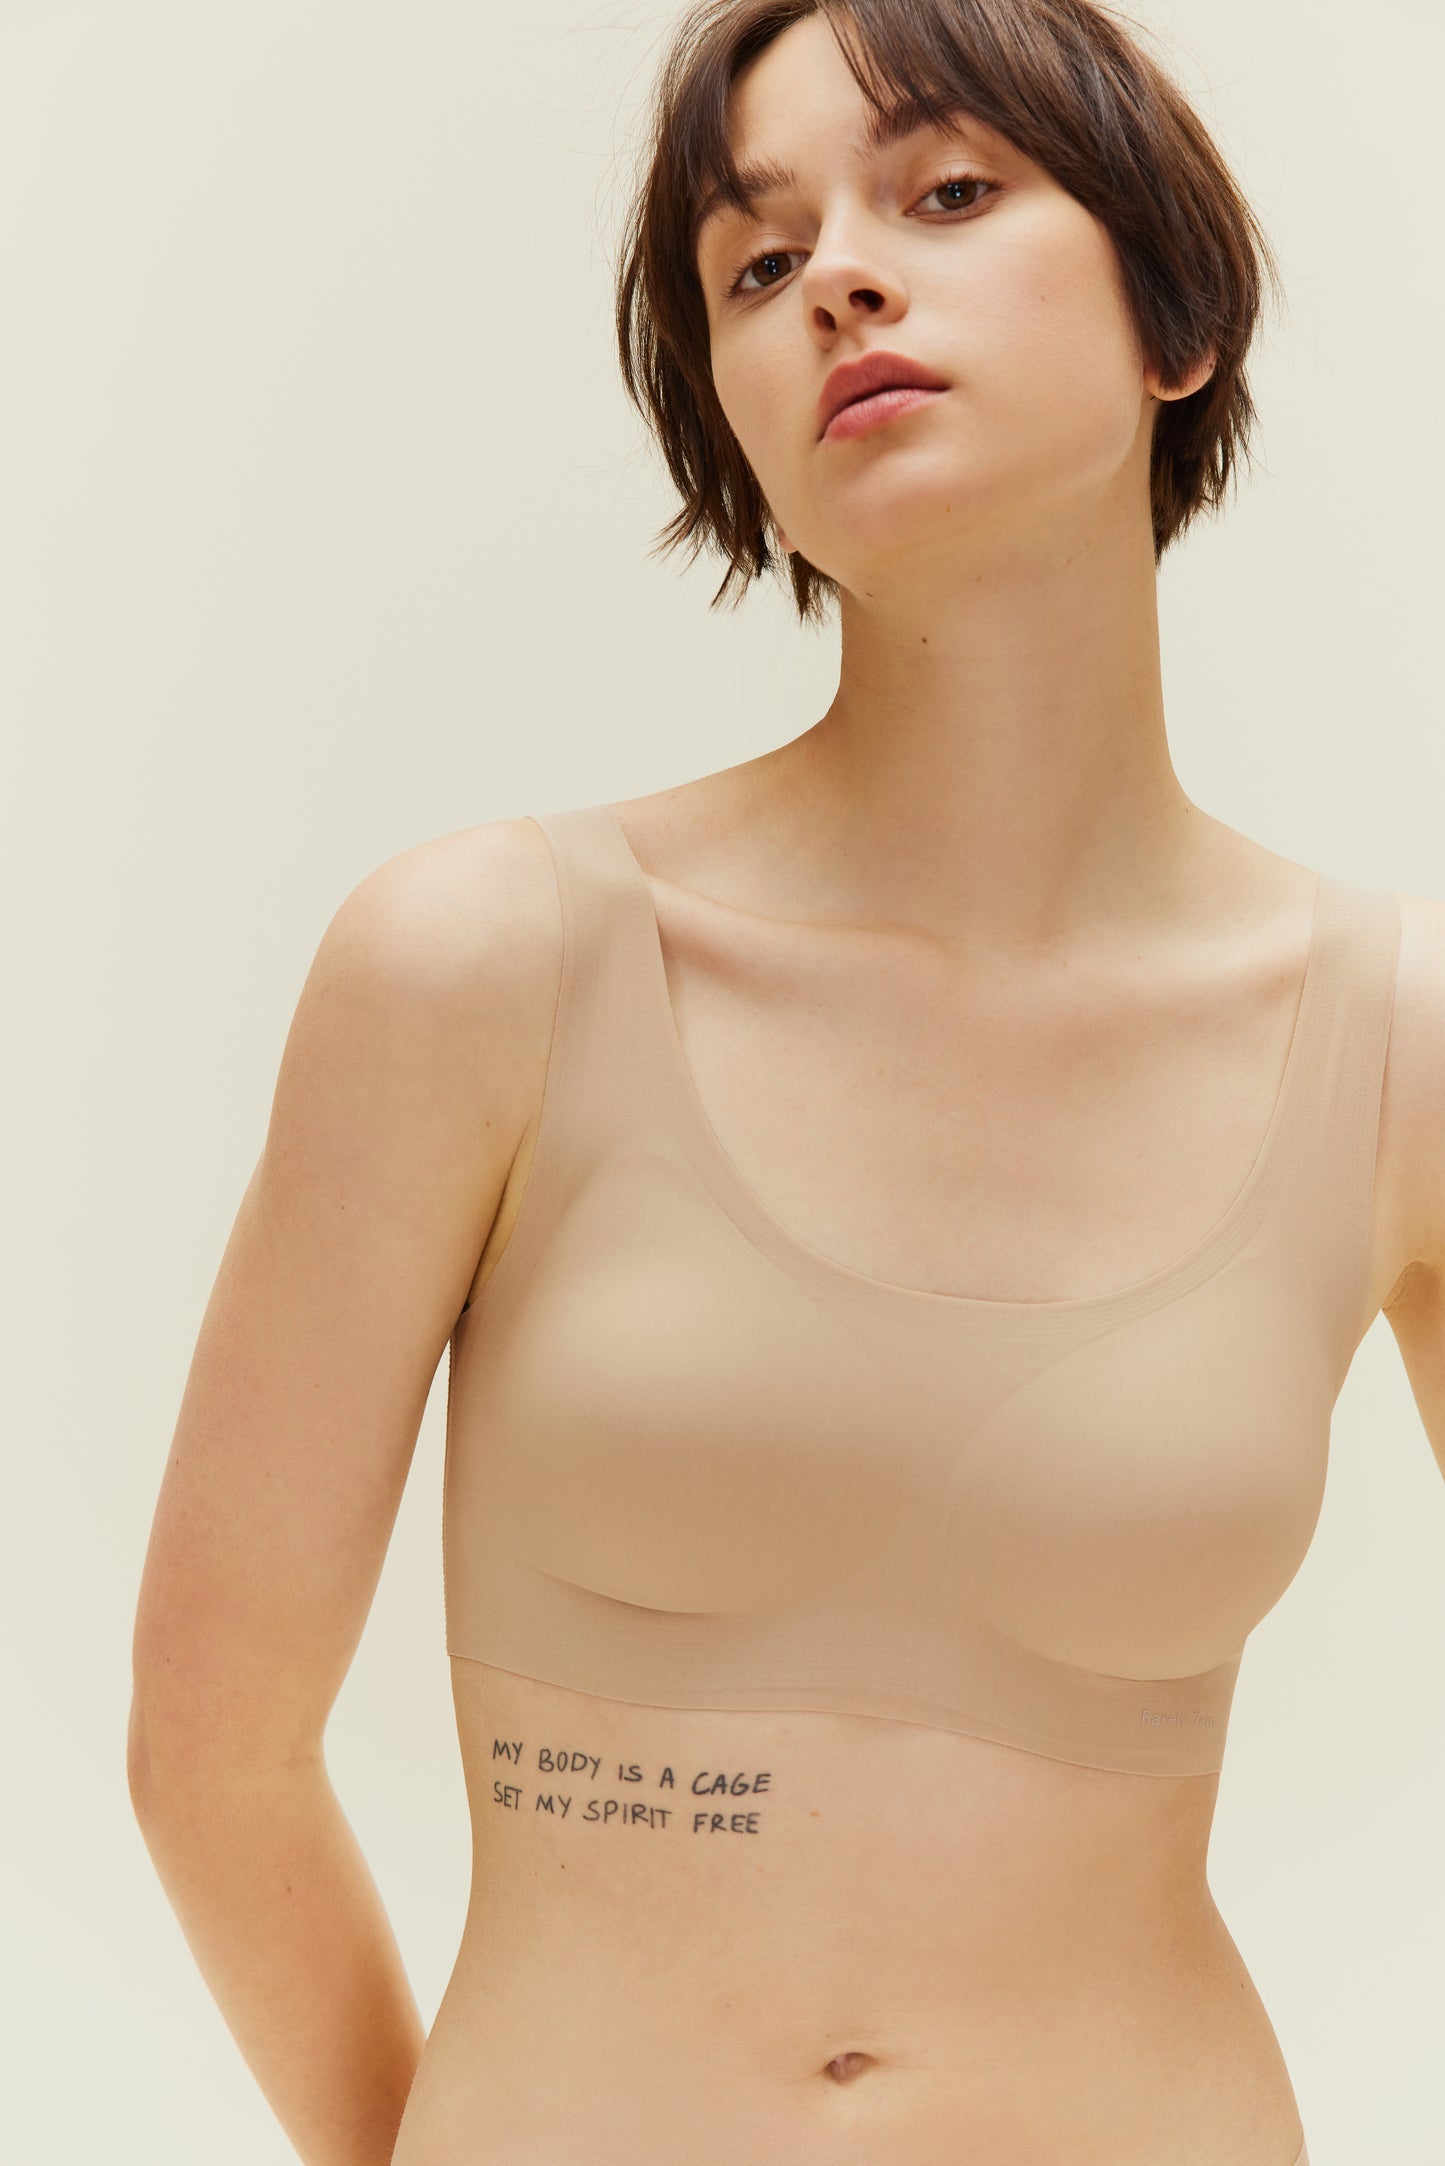 A young woman wearing a Barely Zero Classic Bra Trio in beige, embossed with the phrase "my body is a cage set my spirit free," stands against a light beige background, looking directly at